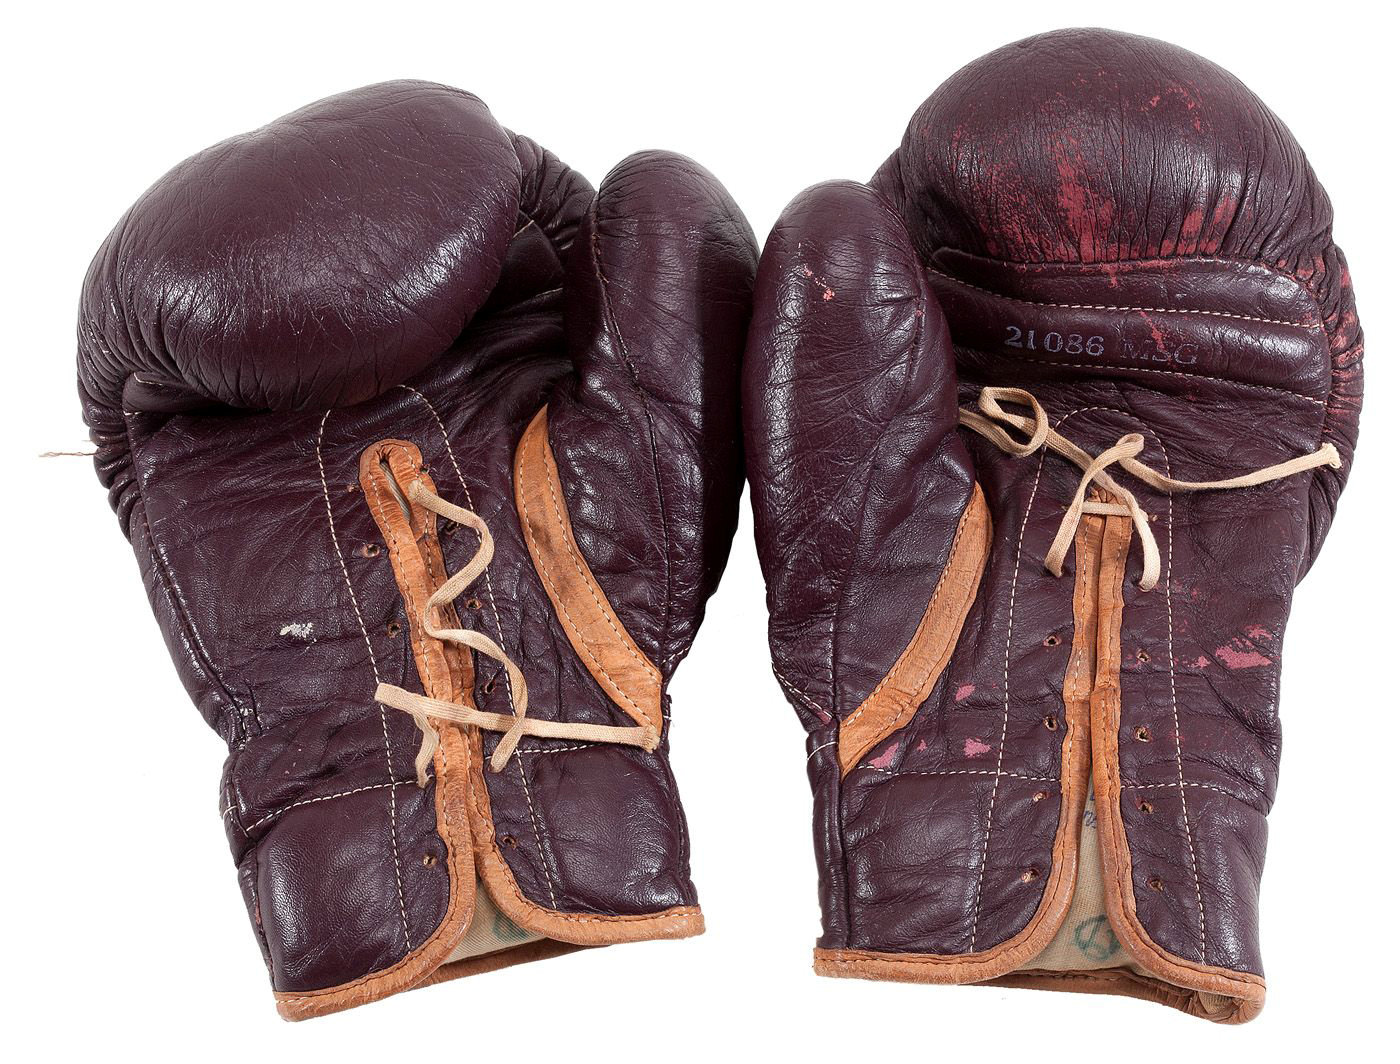 Alis gloves, Fraziers jockstrap from 1971 Fight of the Century up for sale